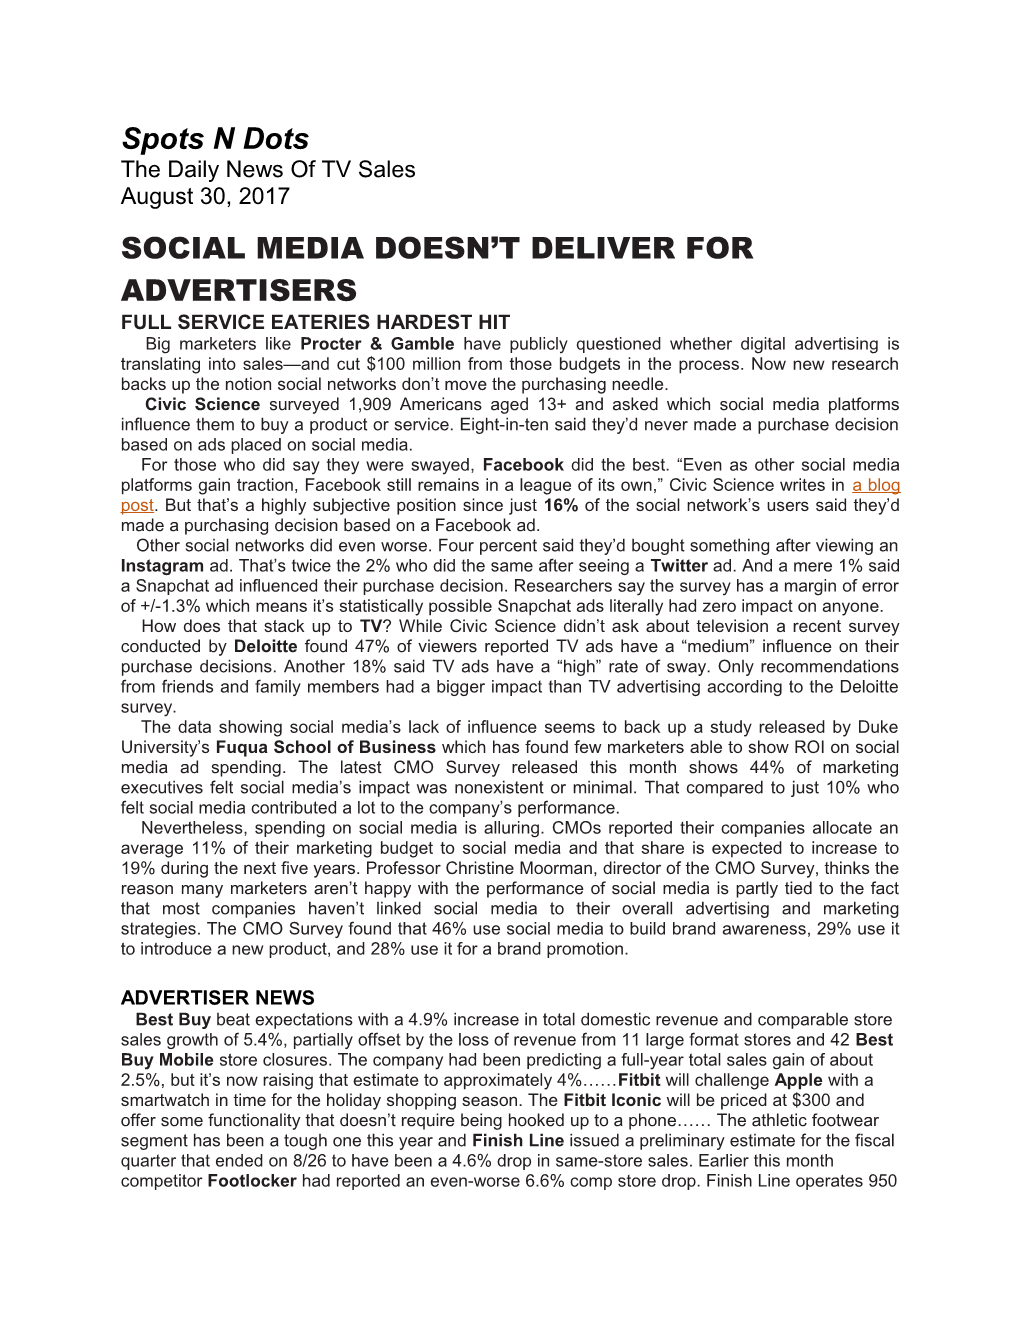 Social Media Doesn T Deliver for Advertisers